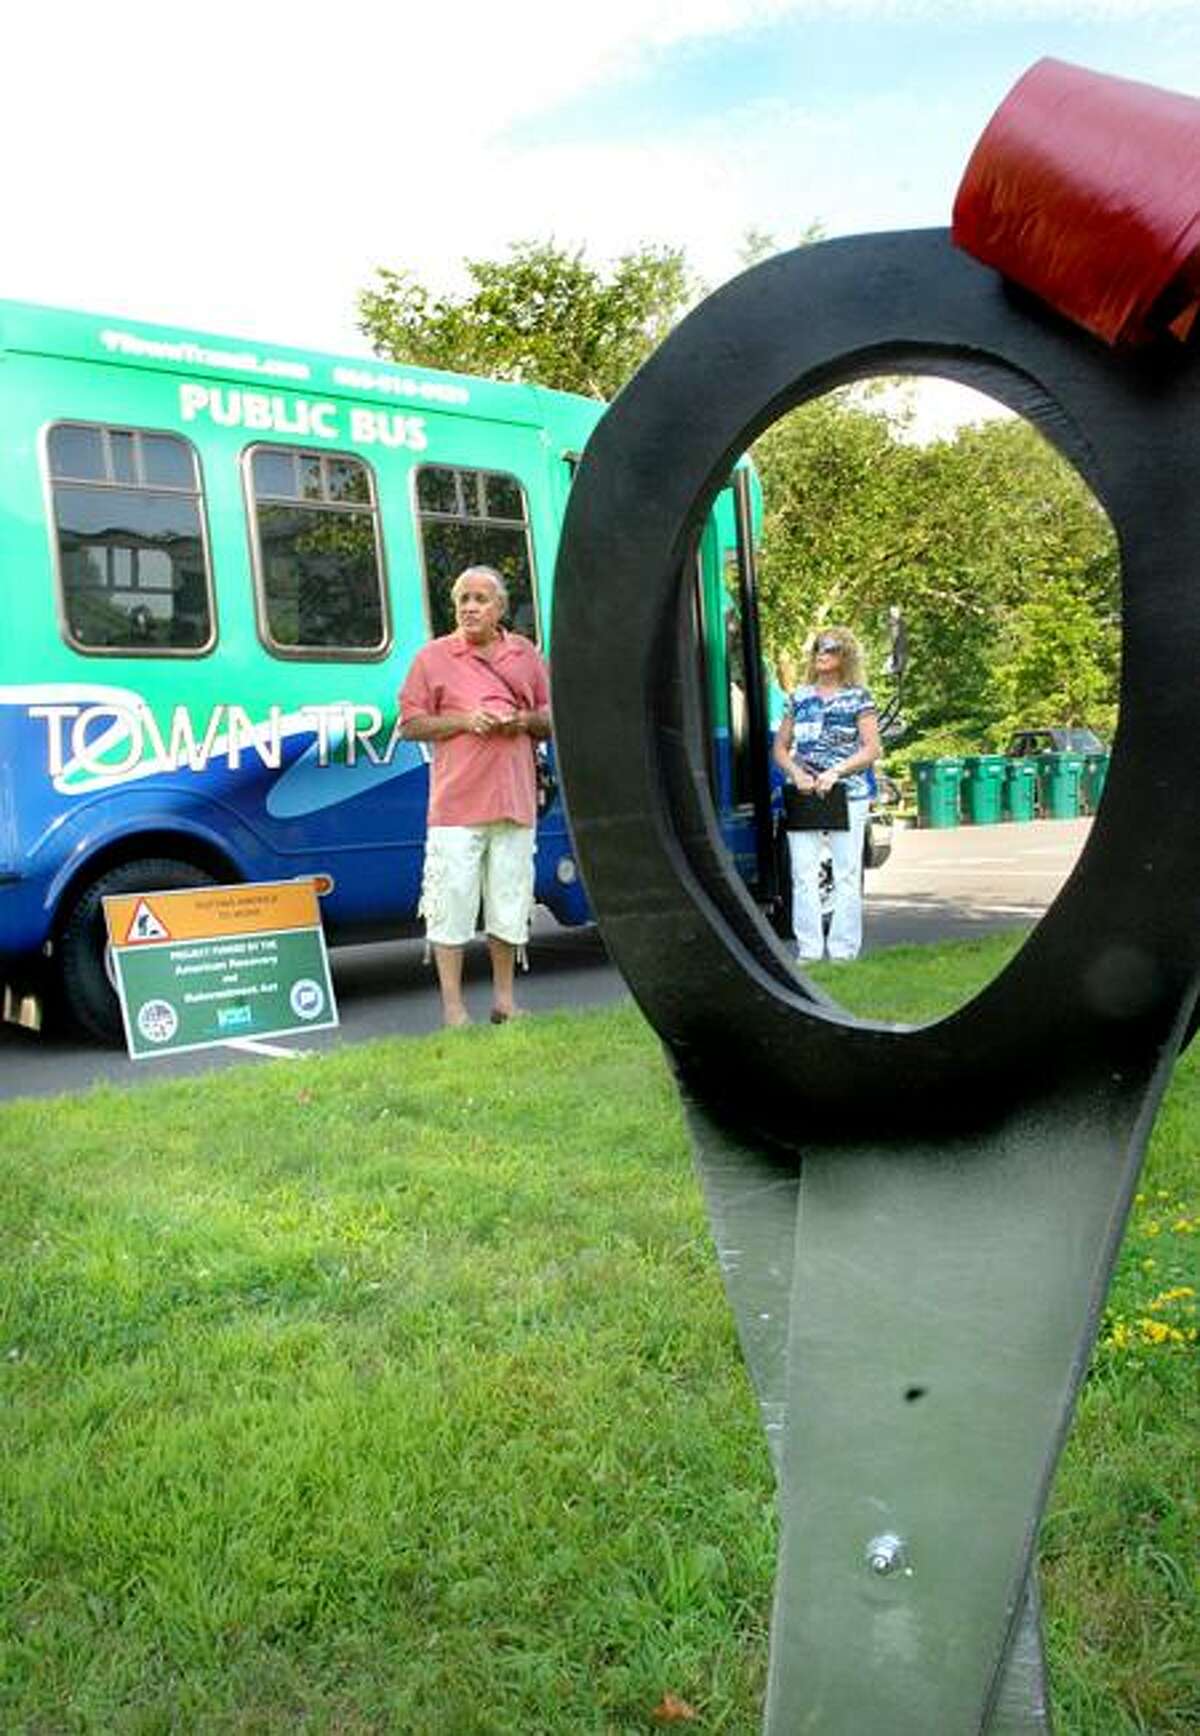 Rich Cabral, Chairman of the Estuary Transit District, left, and vice chairman Leslie Strauss, of the district, speak at the presentation of the first hybrid electric minibuses of their size in New England. The ribbon-cutting took place at Old Lyme Town Hall. Melanie Stengel/Register